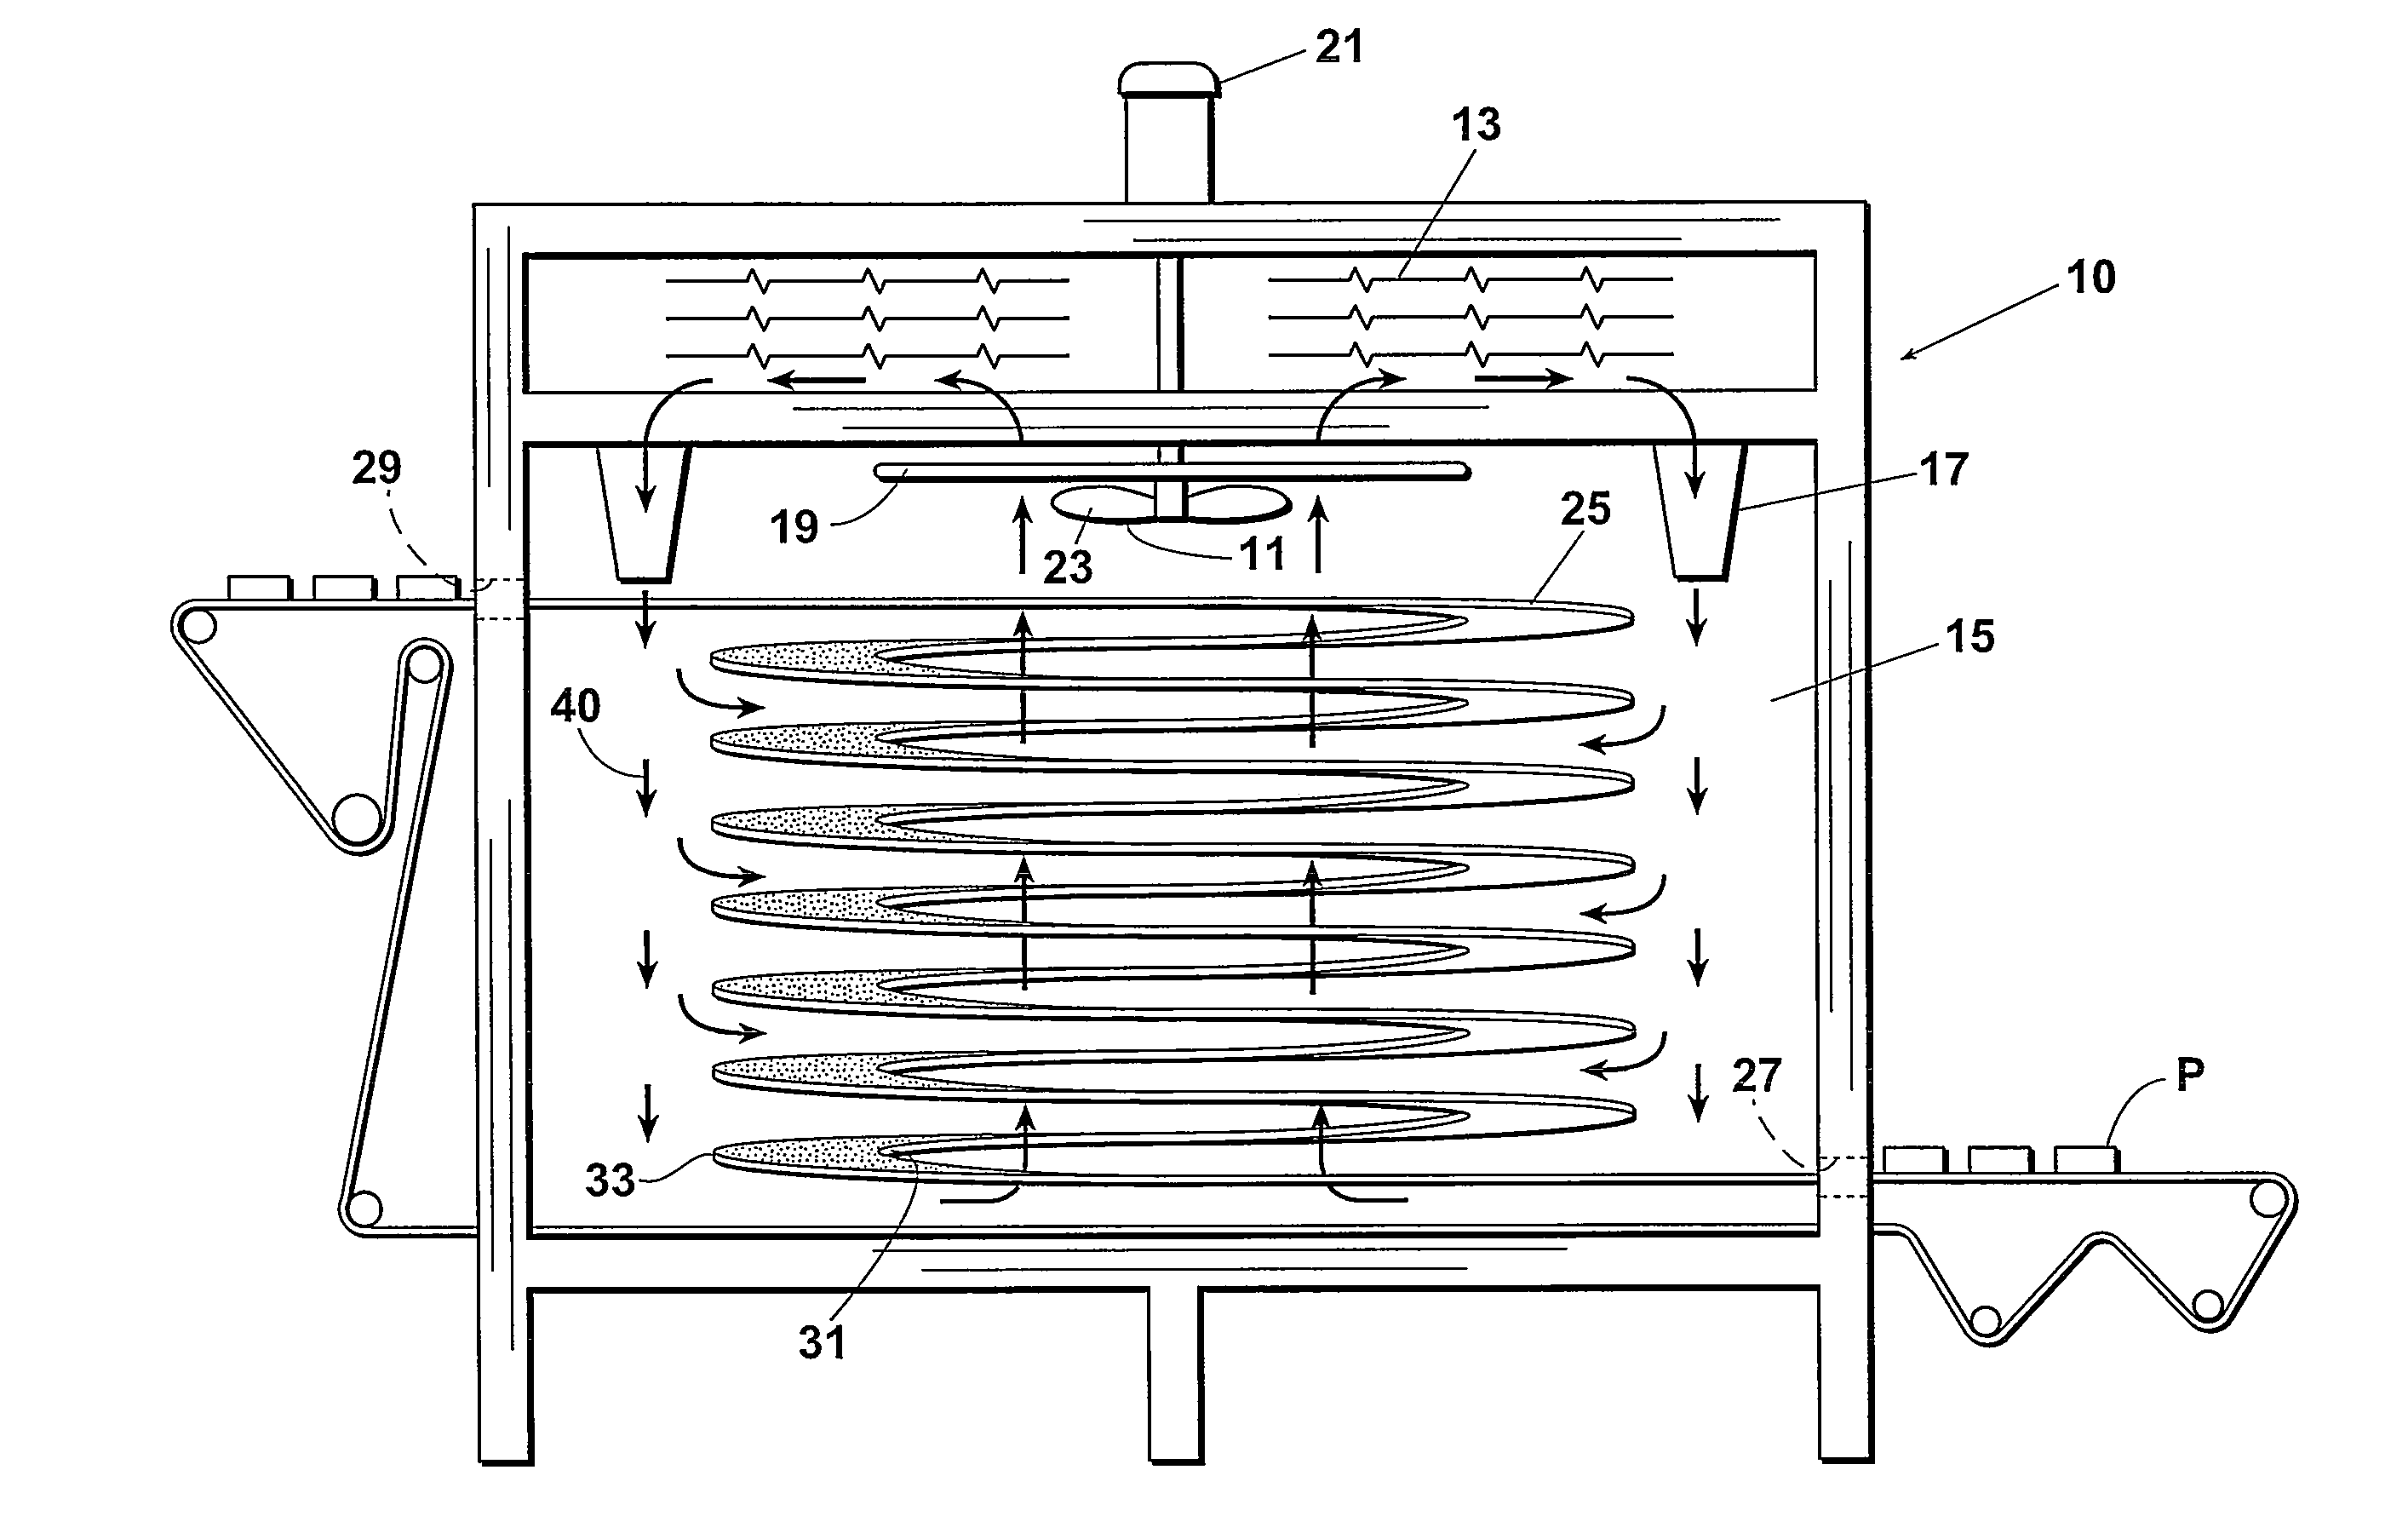 Airflow Pattern for Spiral Ovens